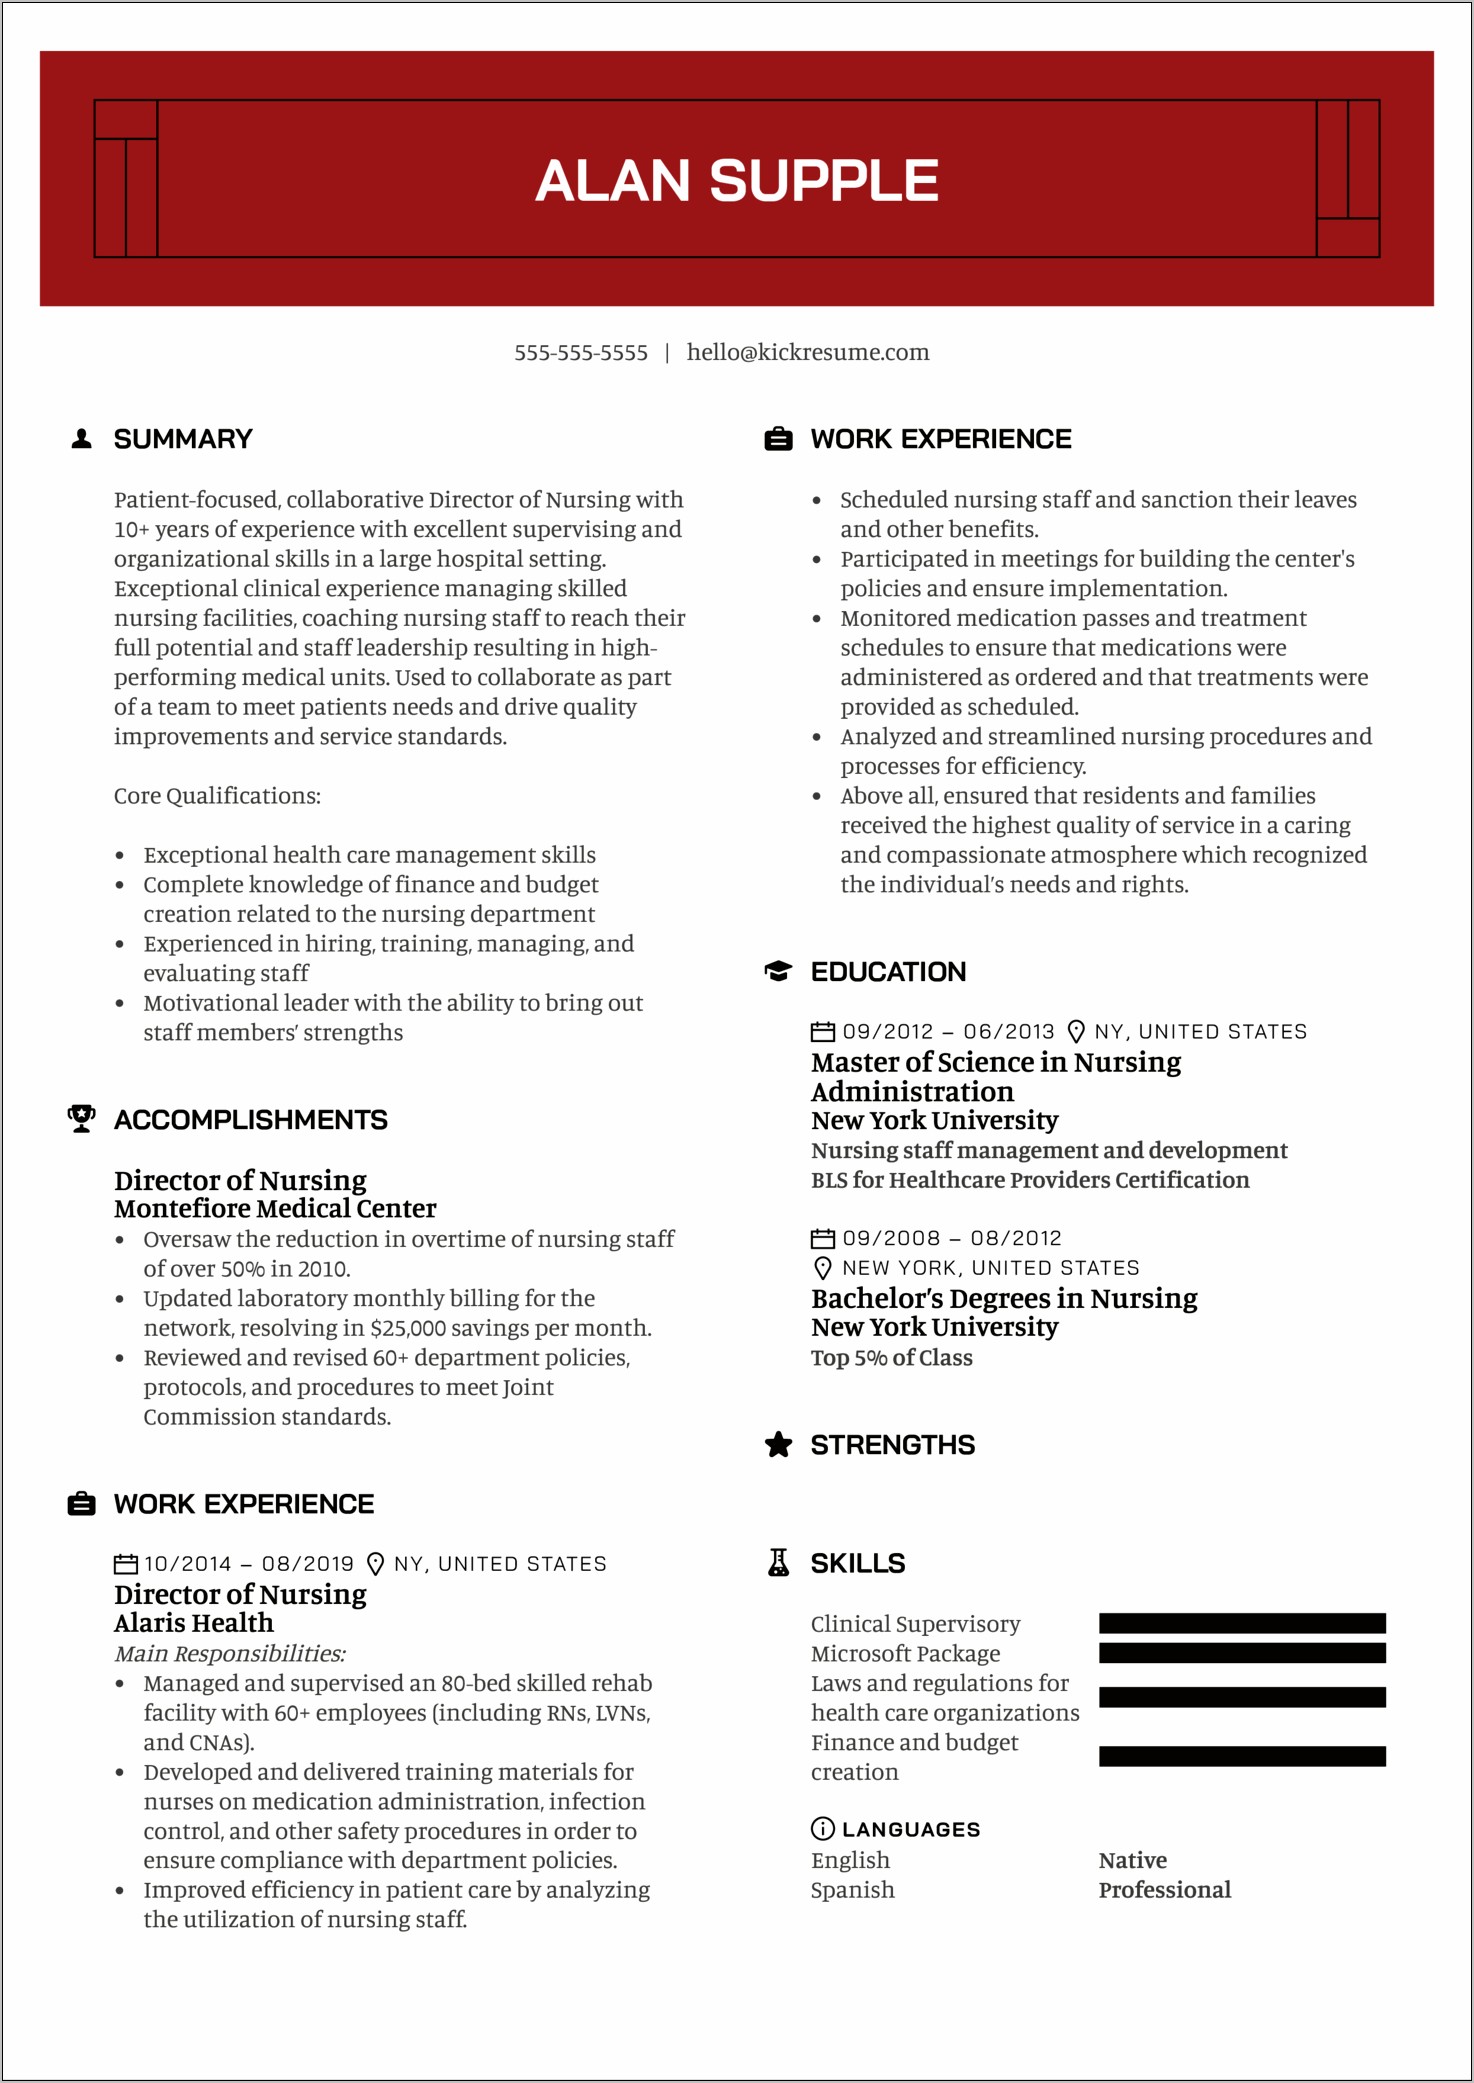 Examples Of Nurse Manager Resumes